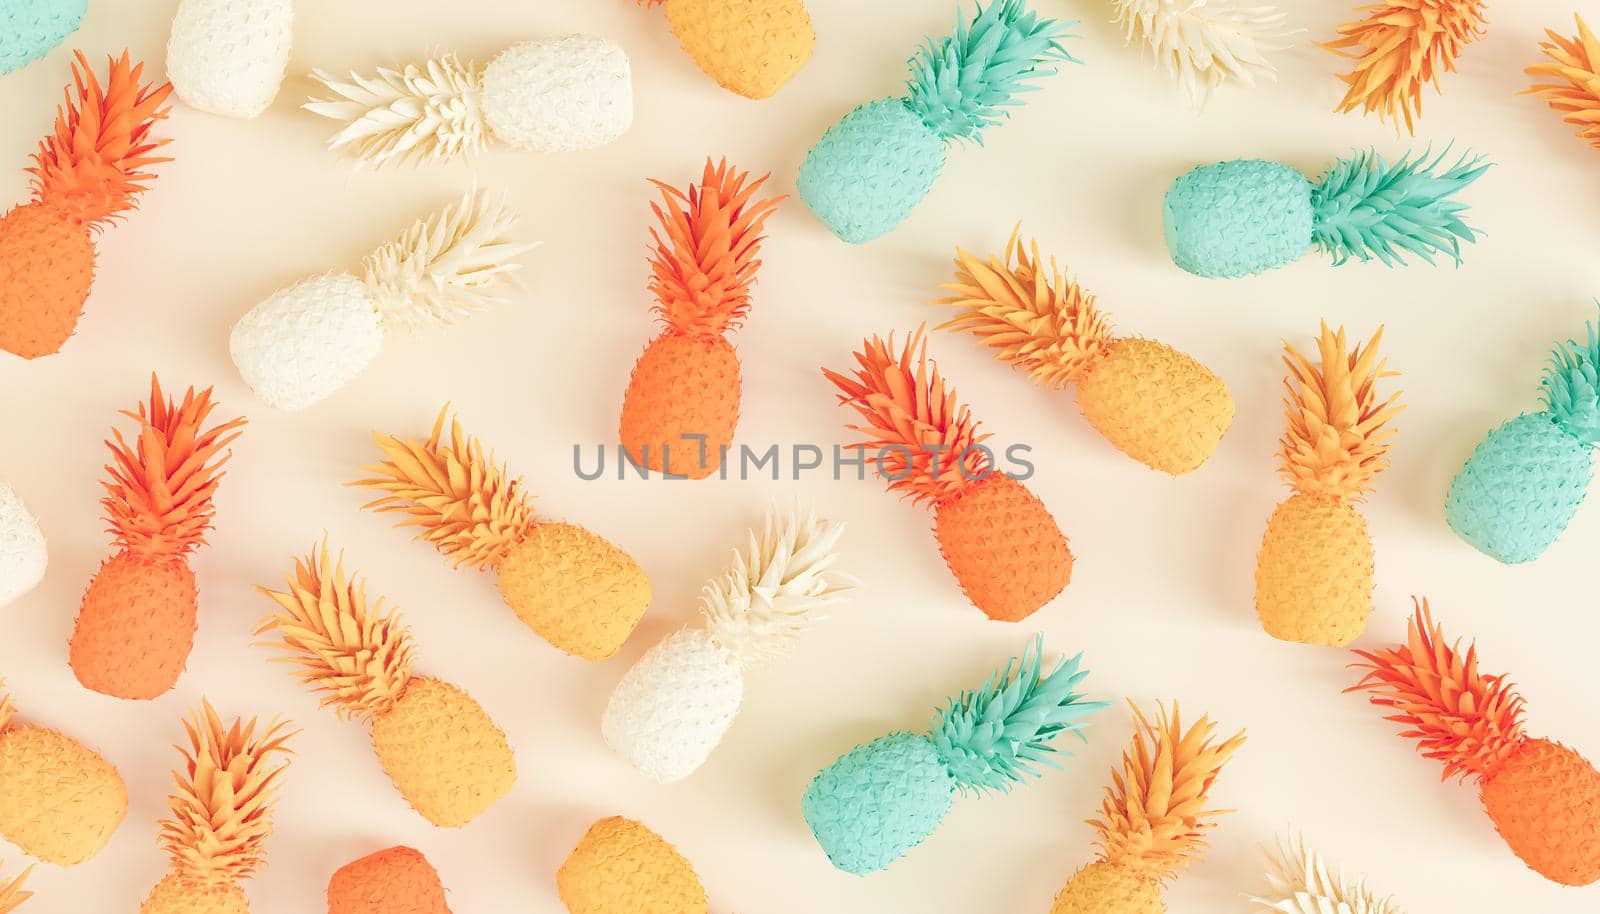 Background with bunch of multicolored pineapples by asolano